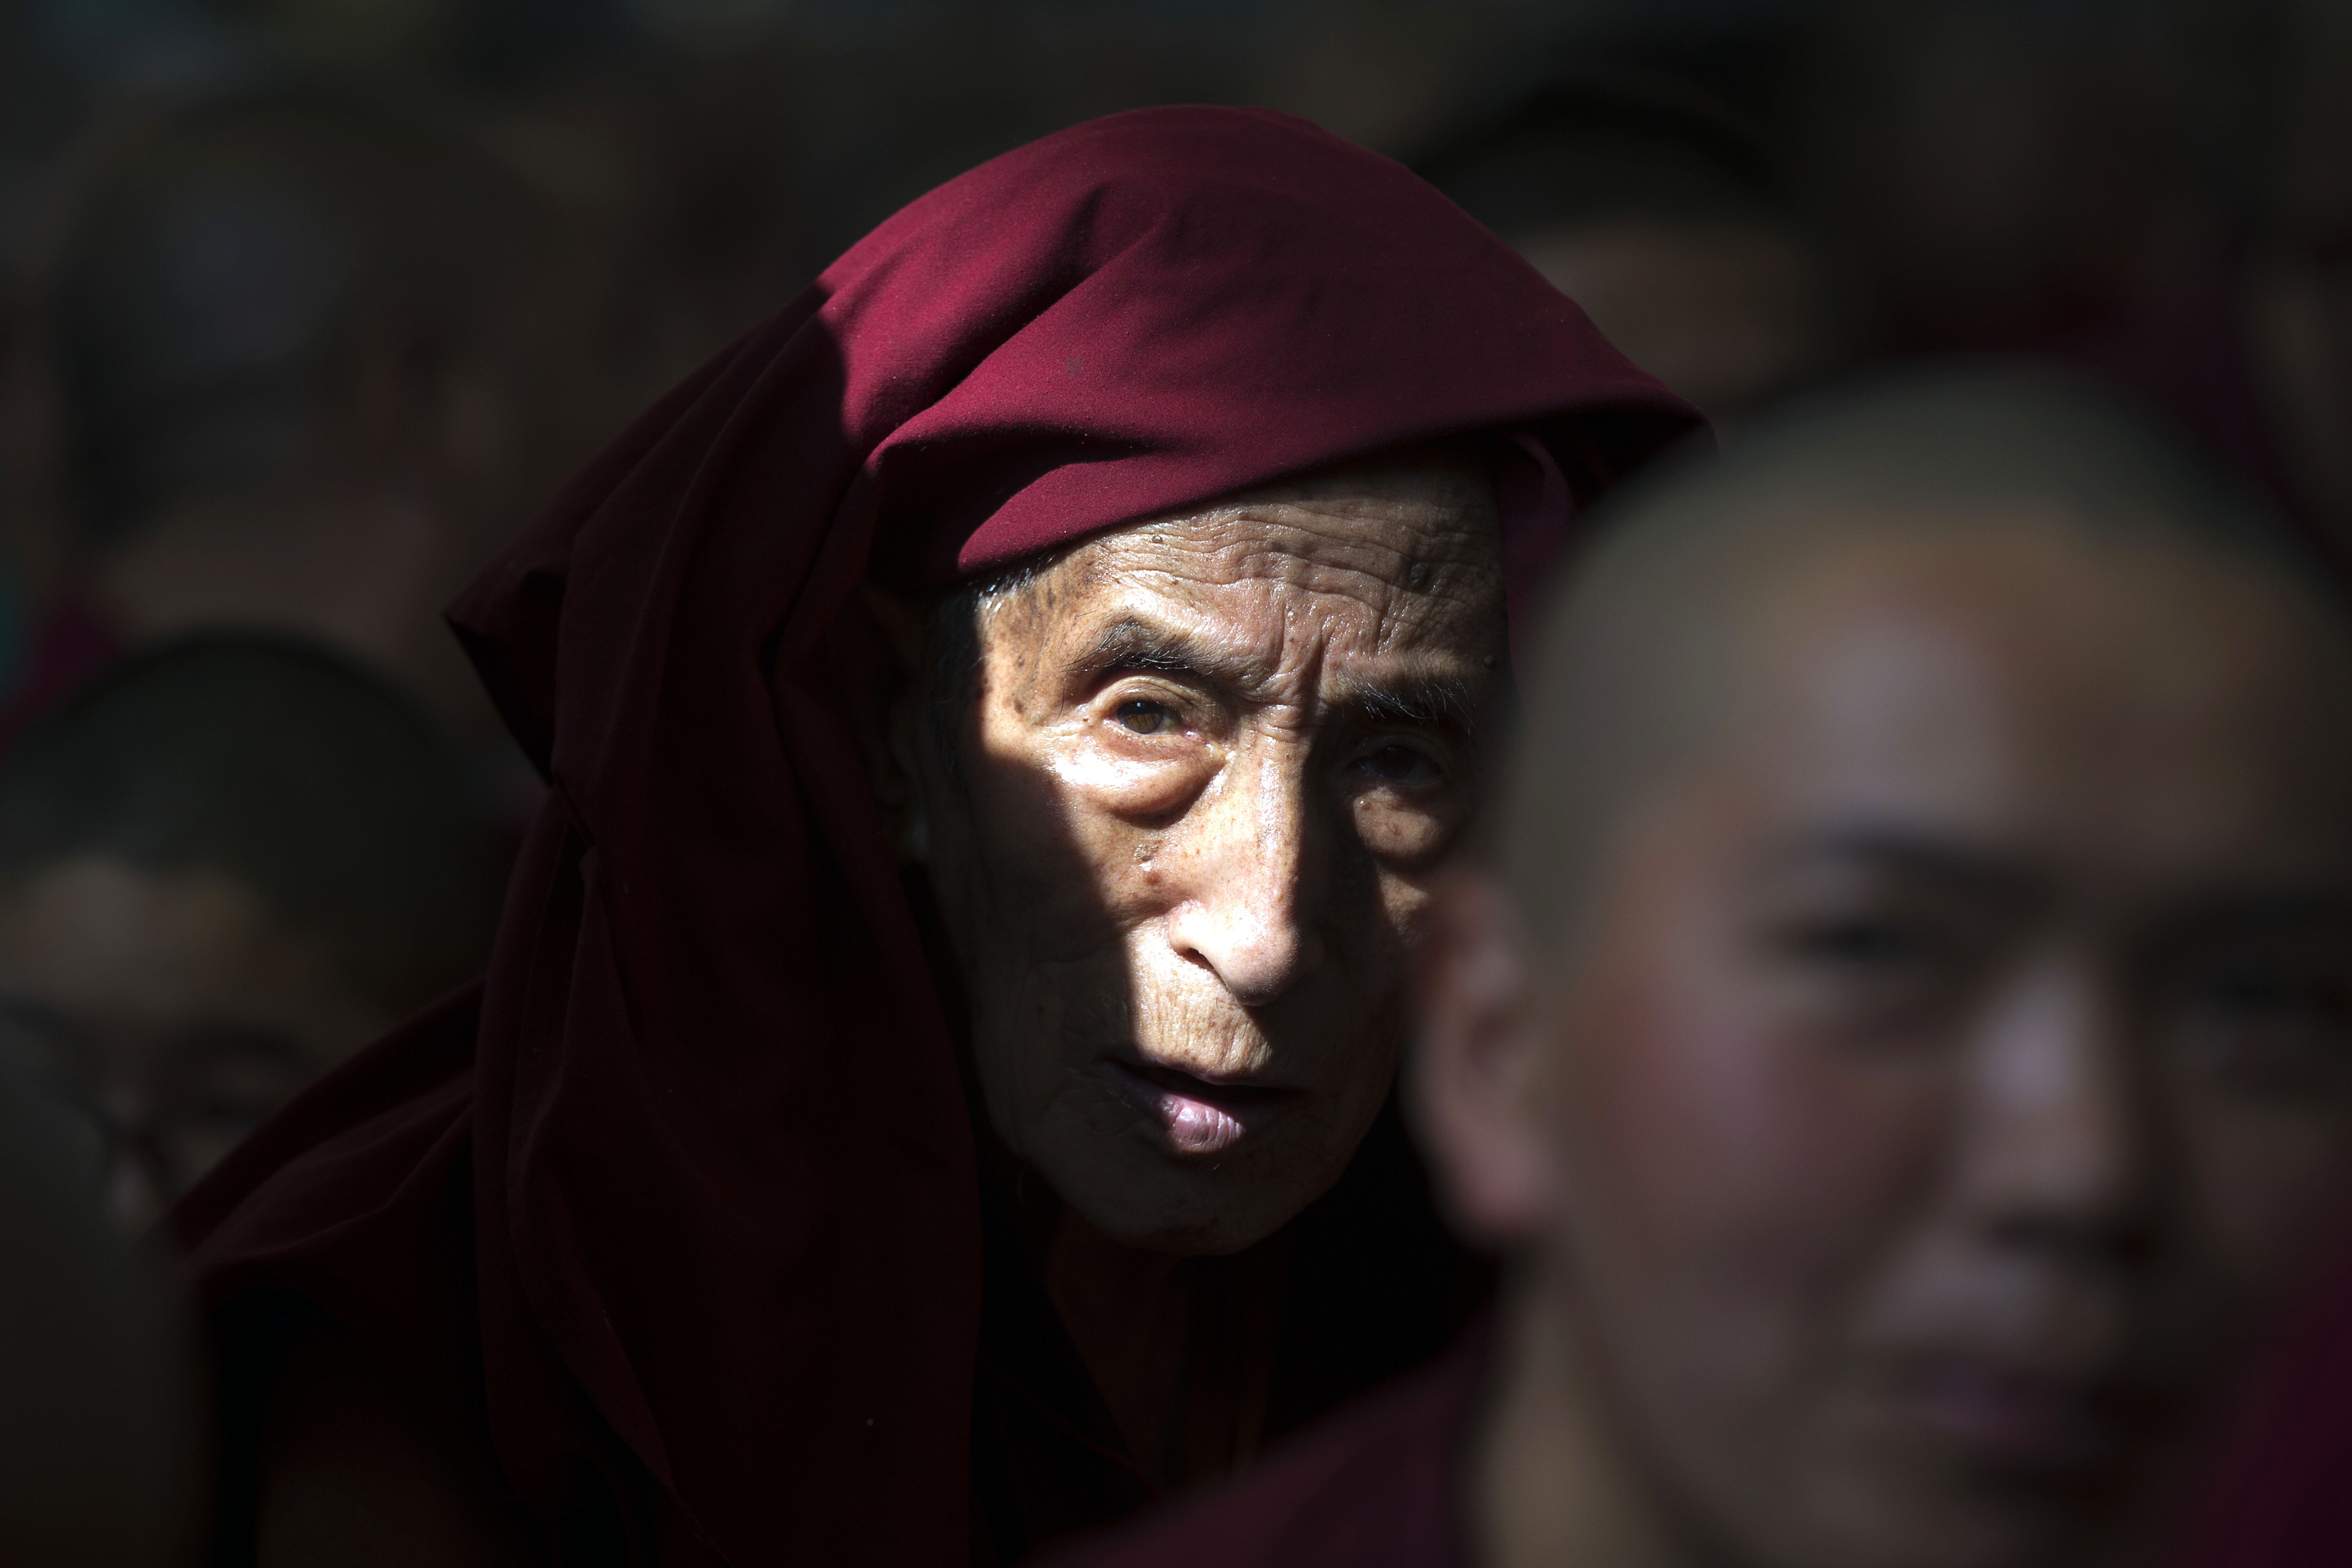 An exile Tibetan Buddhist monk listens to his spiritual leader the Dalai Lama's religious talk at the Tsuglagkhang temple in Dharmsala, India, Monday, June 5, 2017. Each year the Tibetan leader talks to young Tibetans on Buddhist philosophy and religion. The three-day talk will end Wednesday. (AP Photo/Ashwini Bhatia)